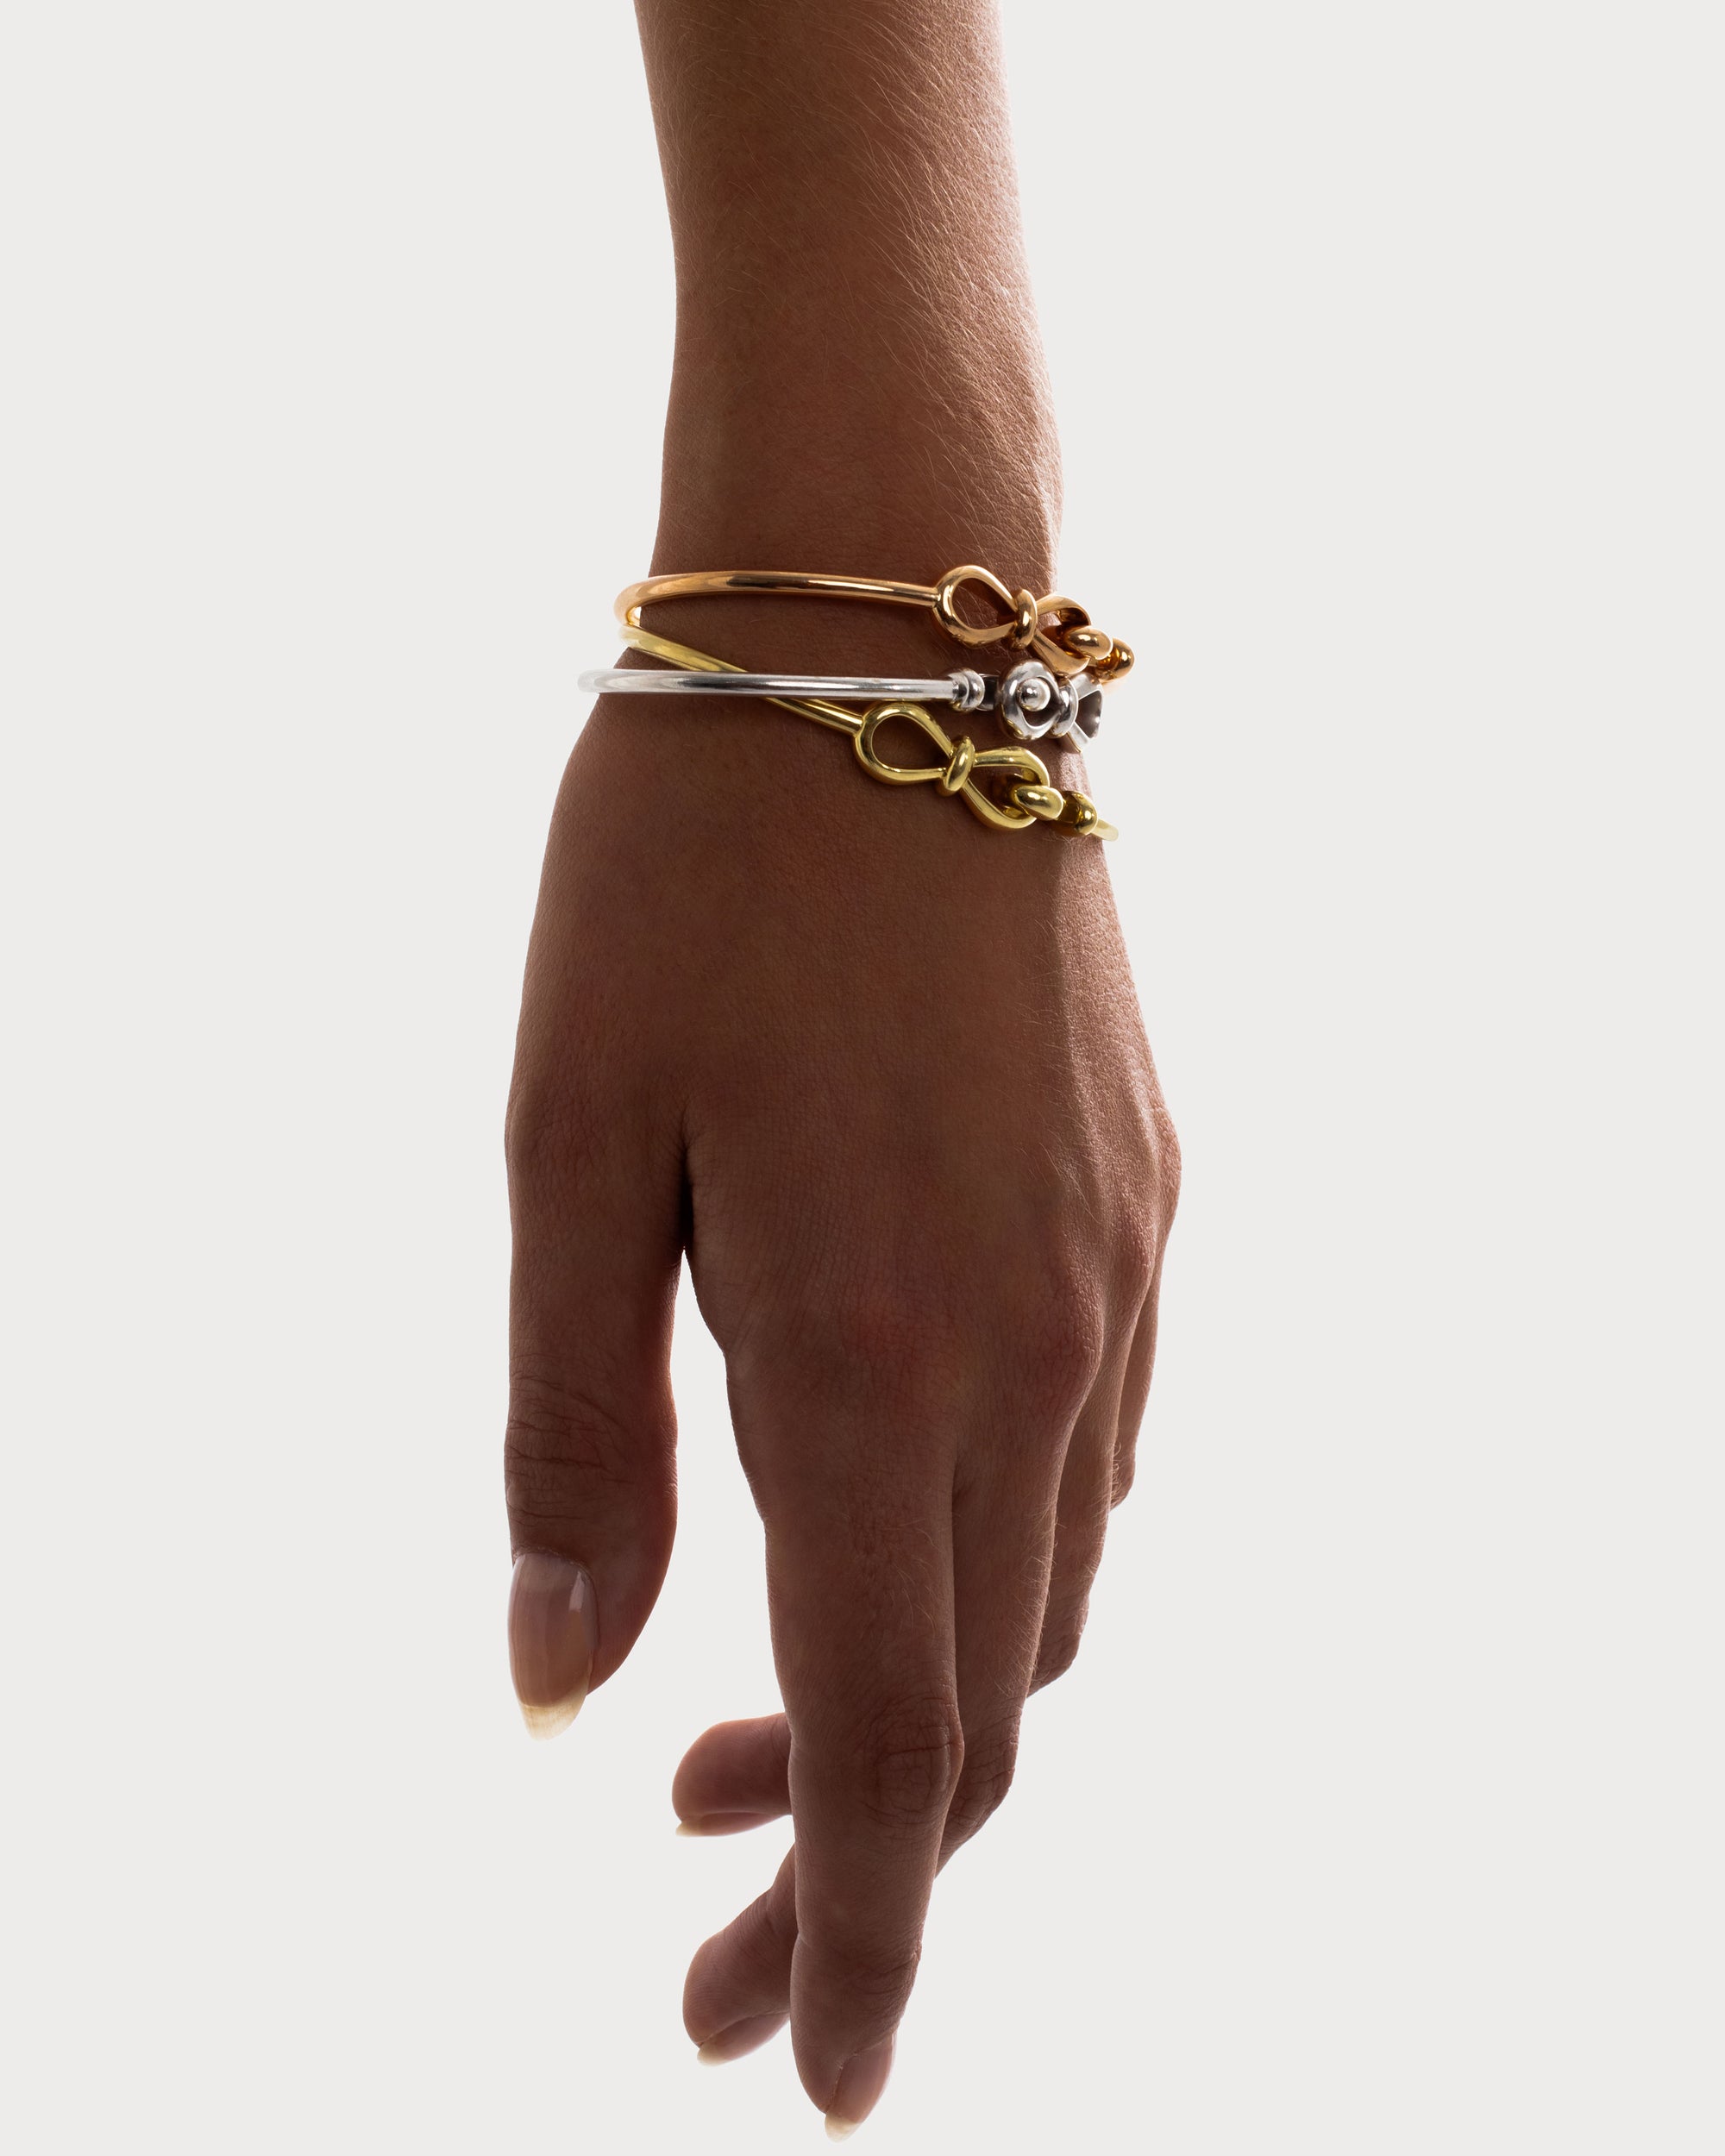 Together Forever Infinity Bangle in Yellow Gold